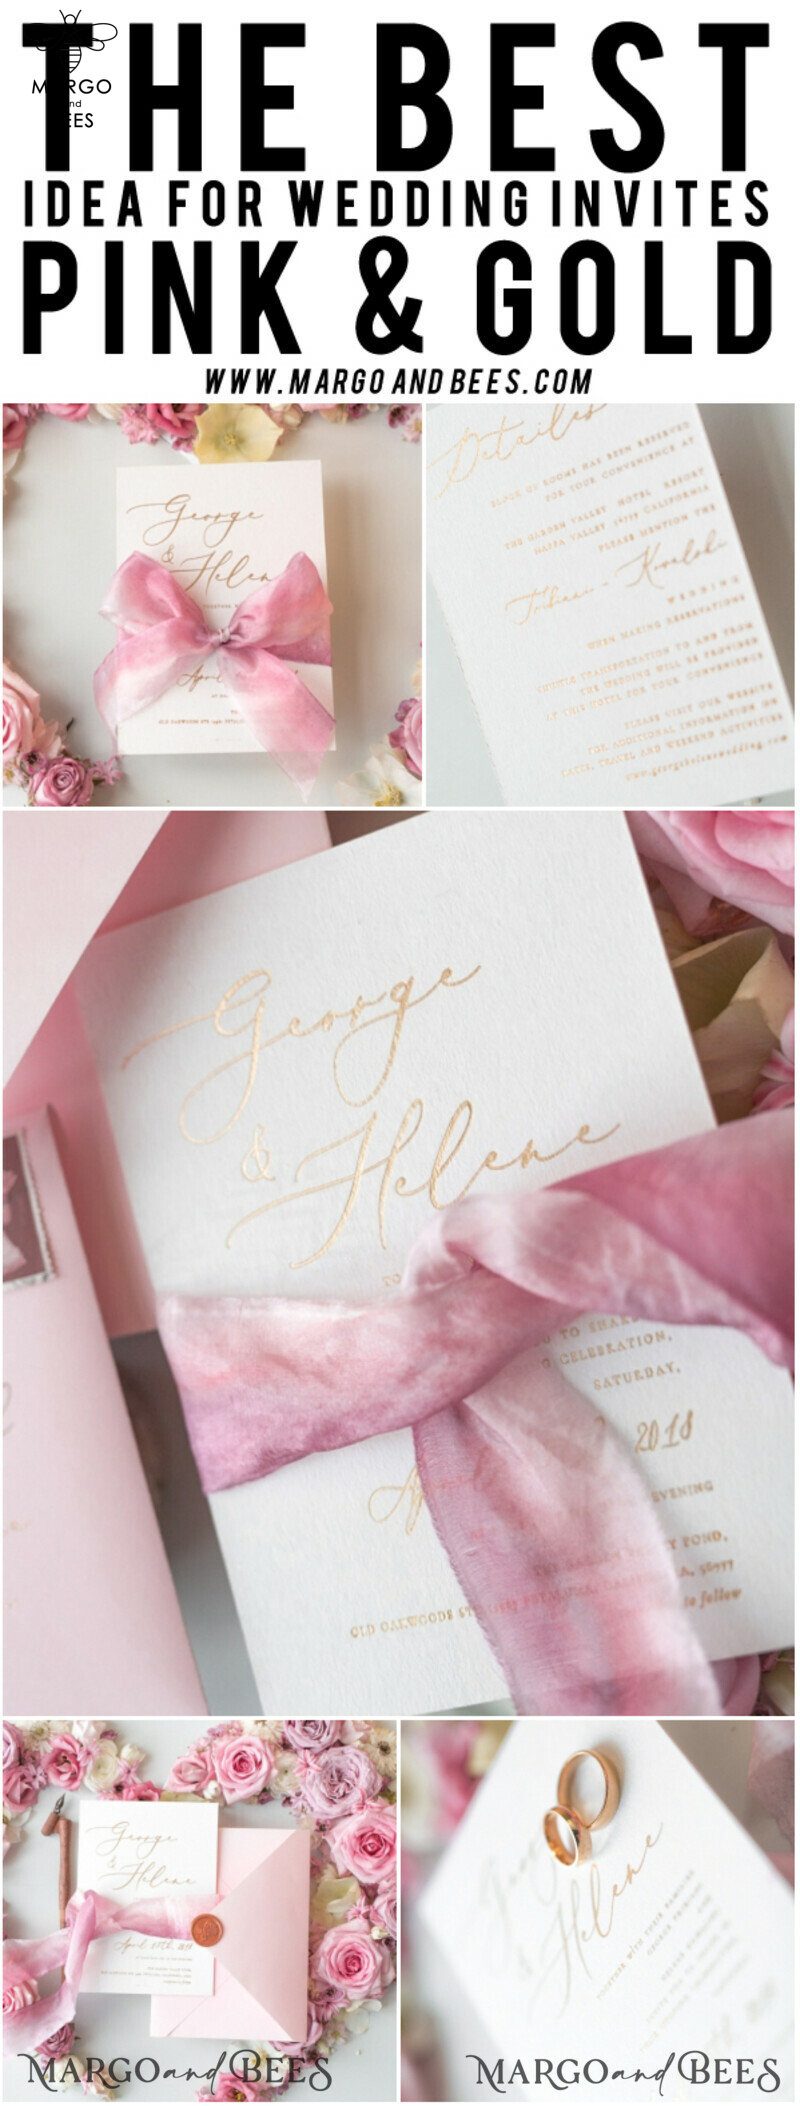 Elegant Personalized Wedding Invitations Romantic Stationery with Vintage Garden Roses and  Handmade Silk Bow Gold Foil Letters  Blush Pink Envelope -51